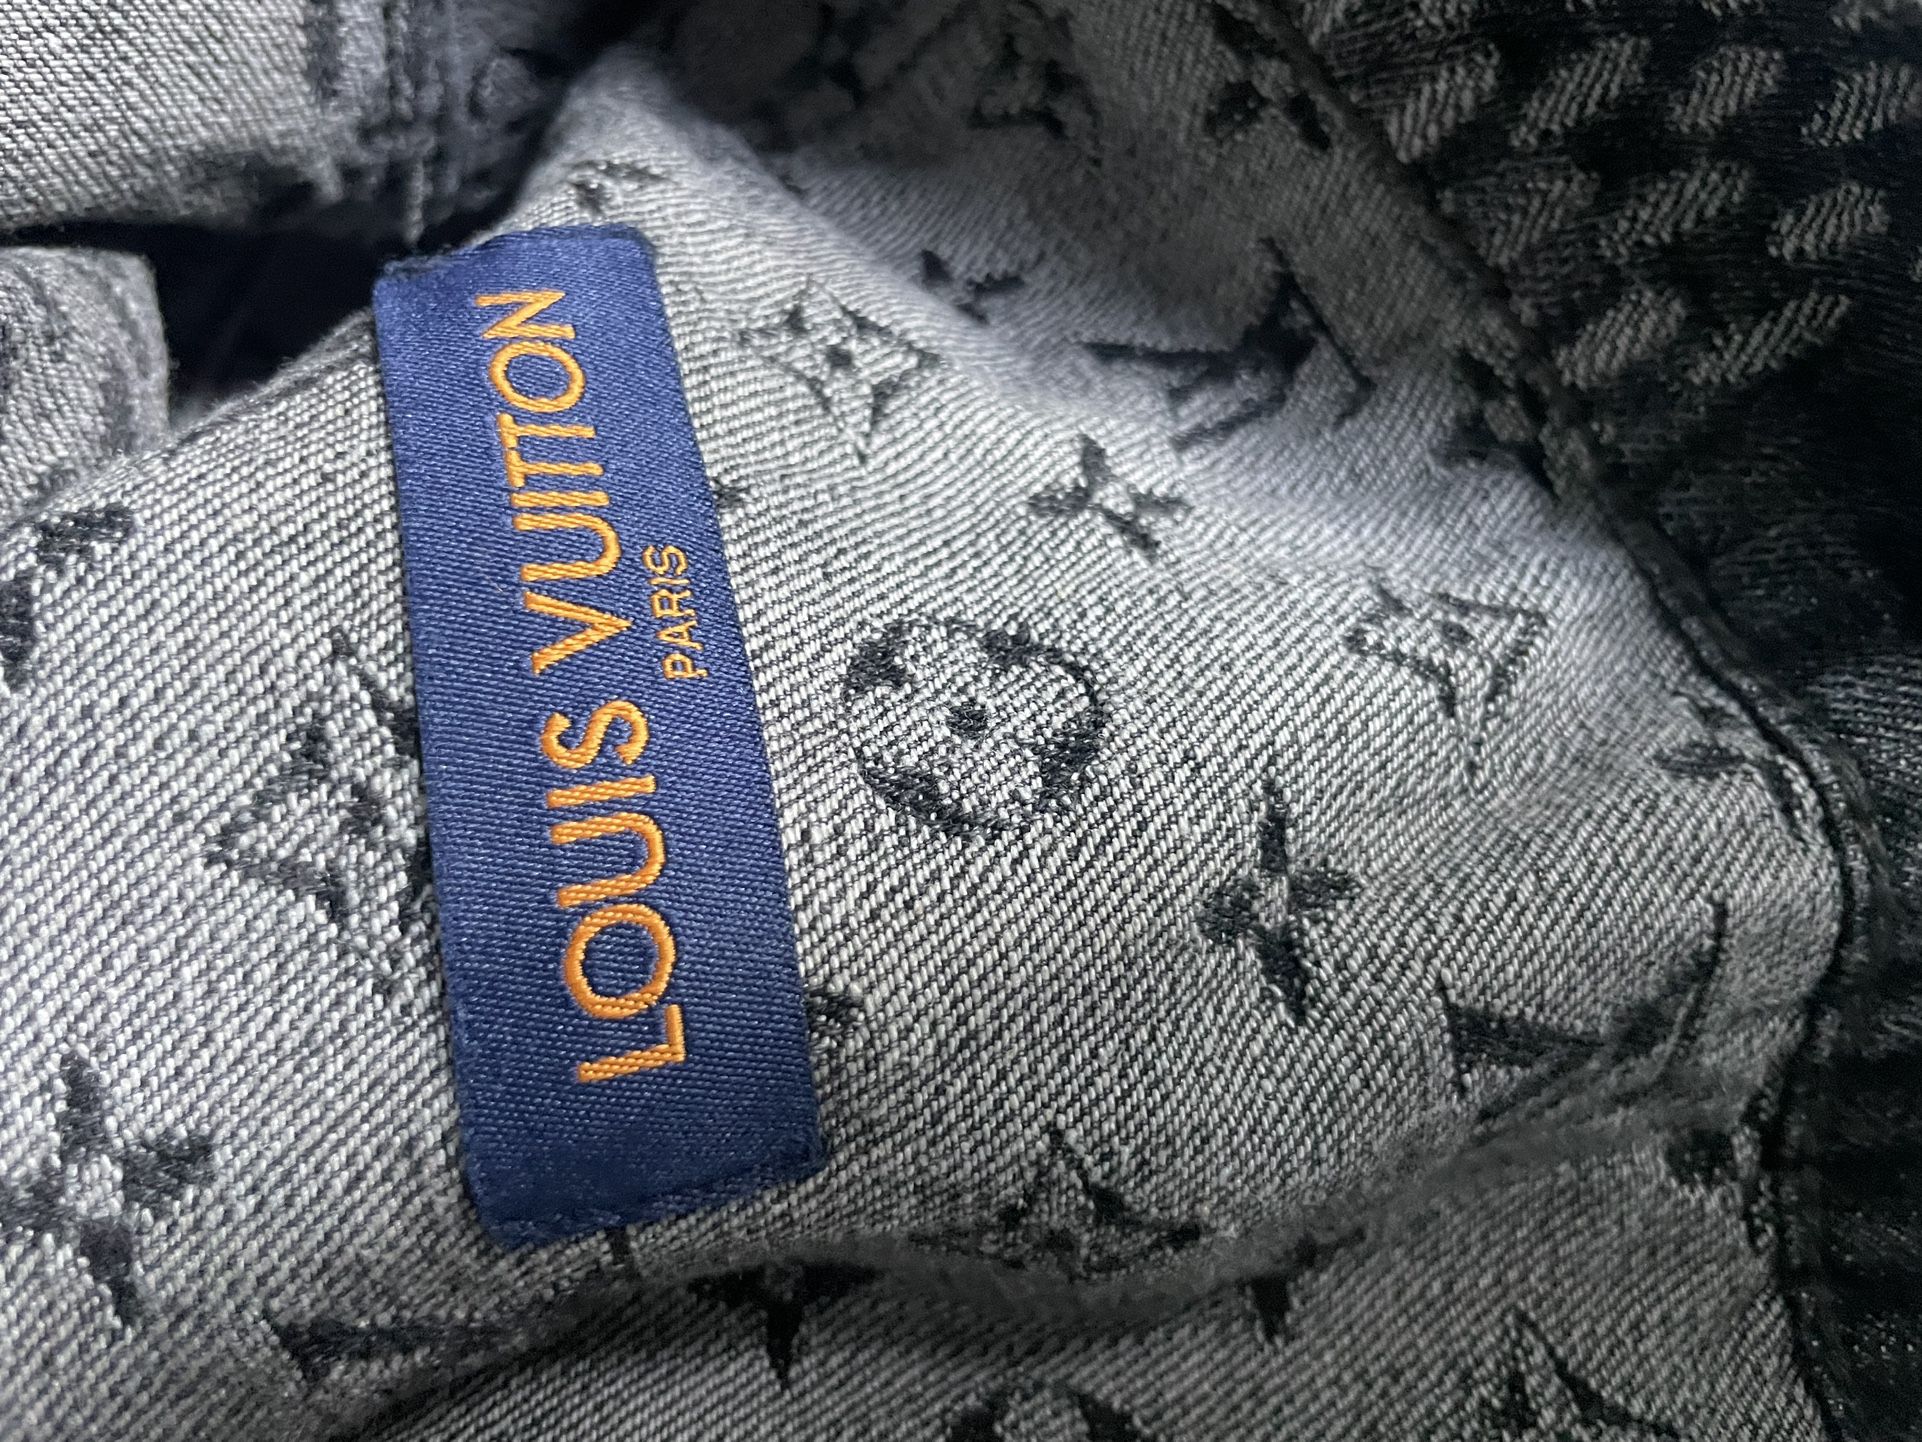 Louis Vuitton X Nigo jacket size M ( posted on Grailed as well, so  authenticity guaranteed) for Sale in Philadelphia, PA - OfferUp